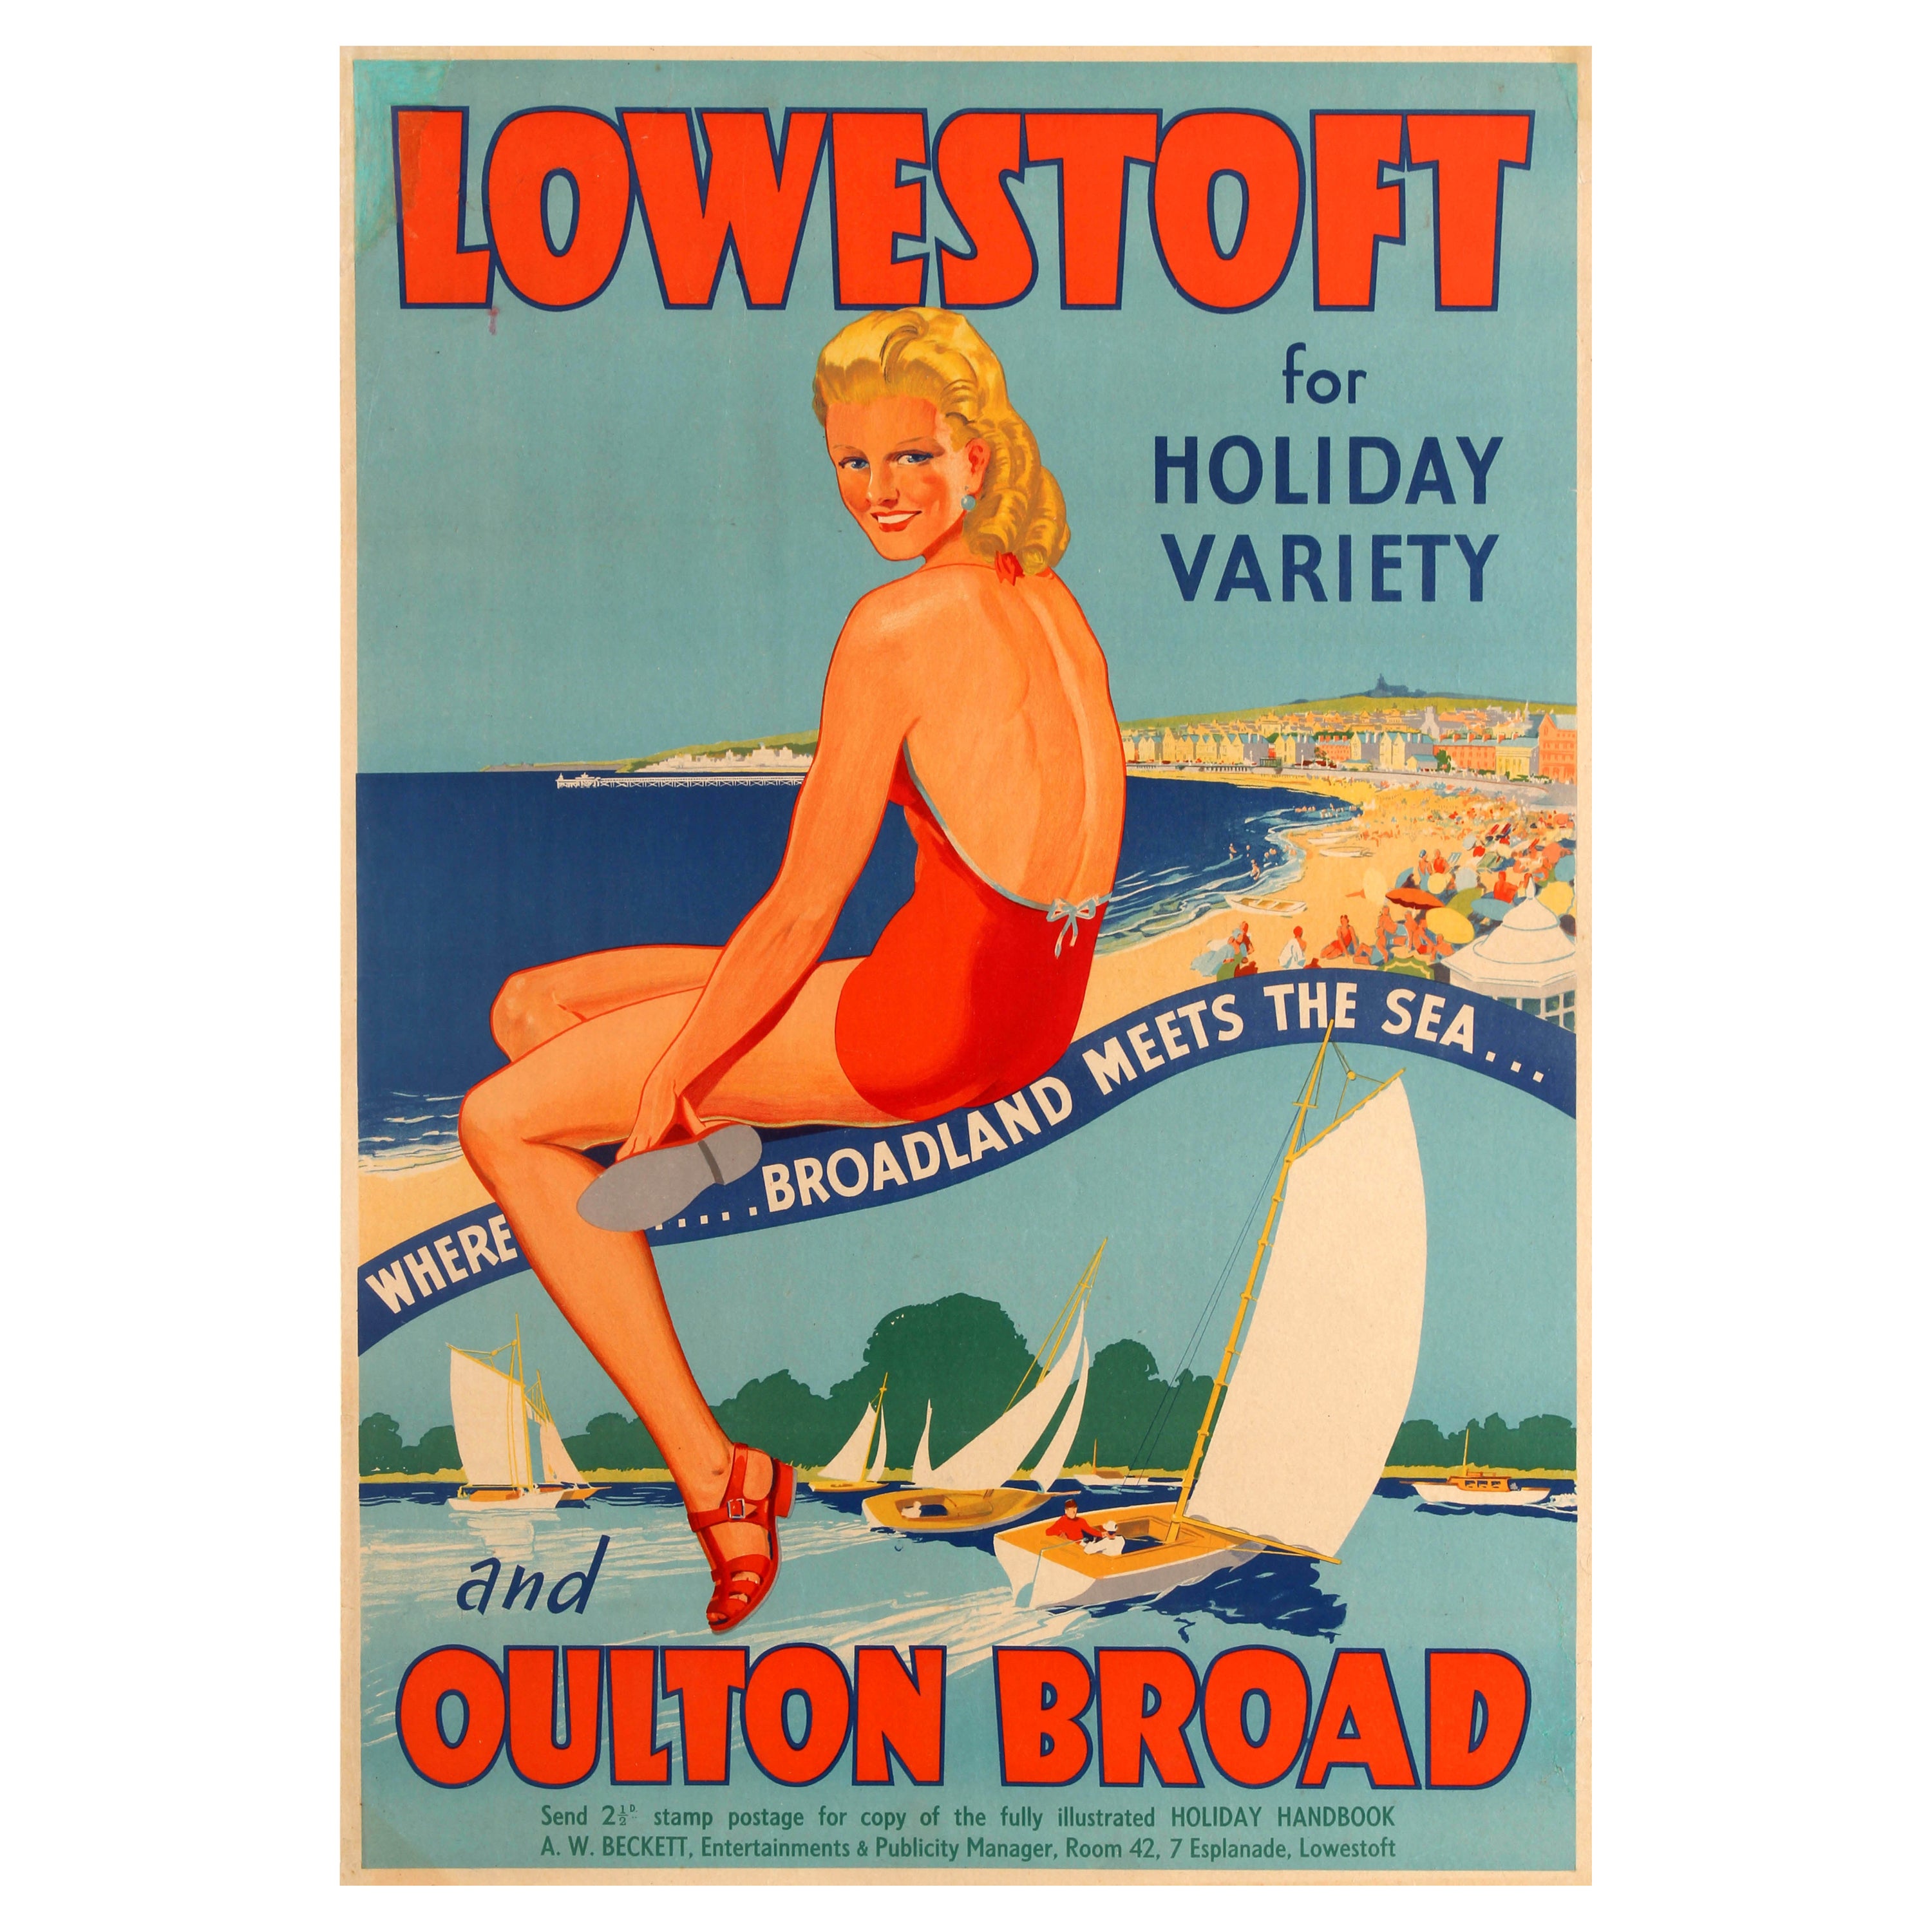 Original Vintage Travel Poster Lowestoft And Oulton Broad For Holiday Variety For Sale